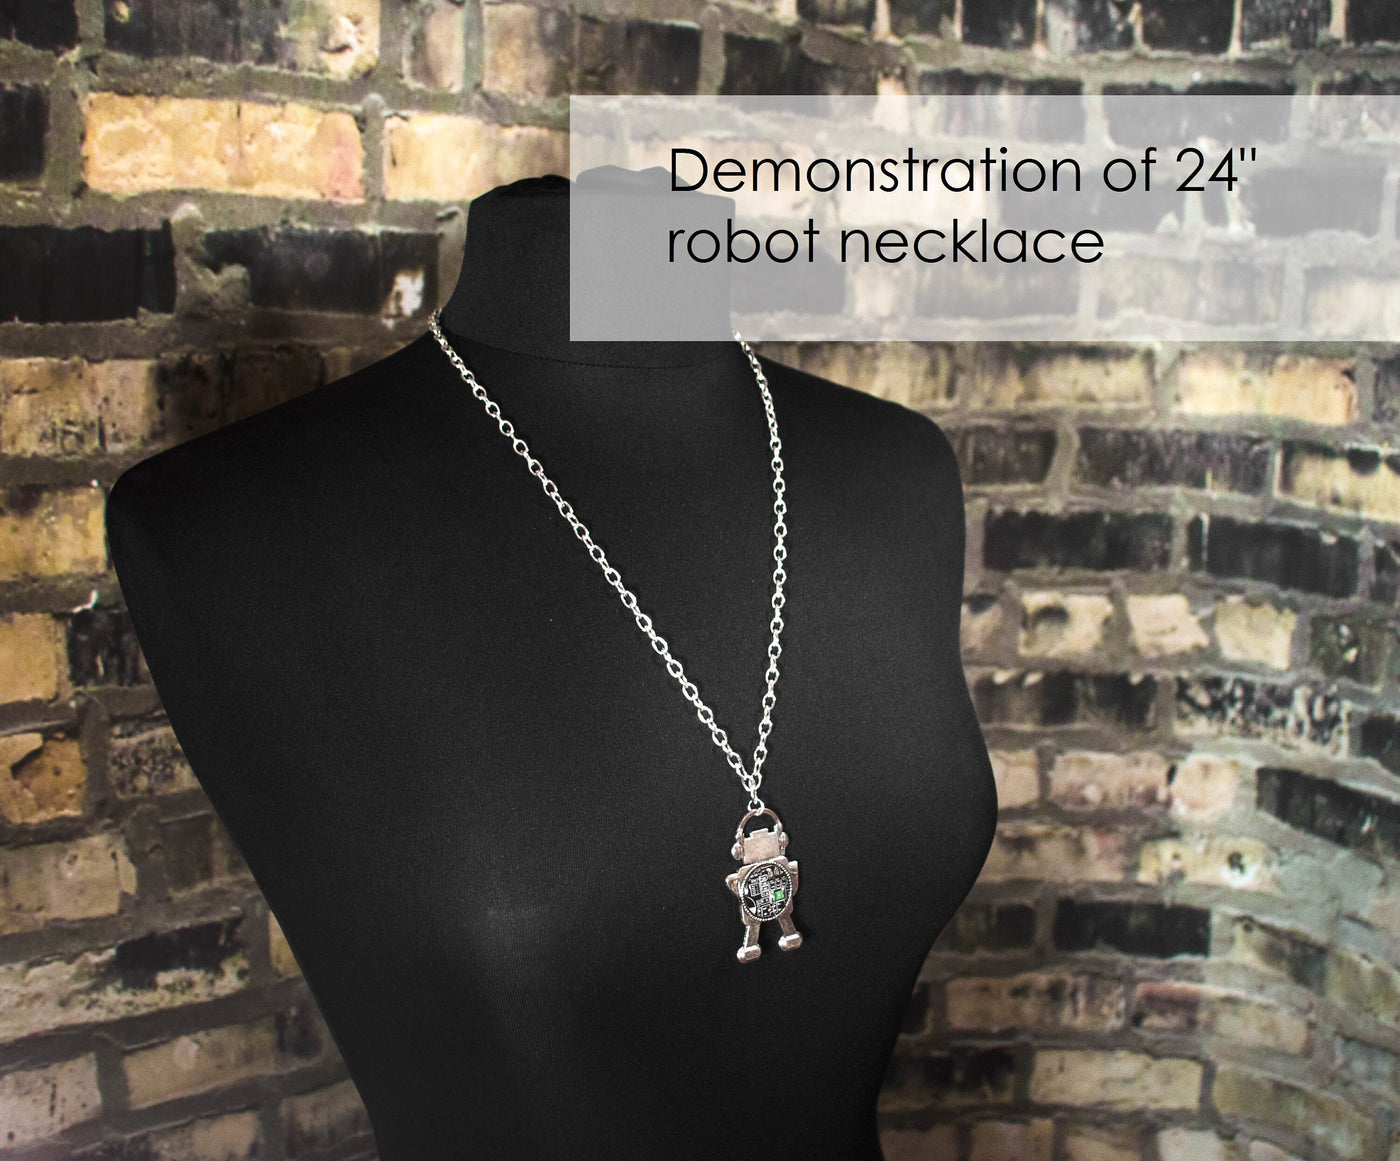 Violet Circuit Board Robot Necklace, Robotics Jewelry, Robot Engineering Gift, Cyber Punk Gift